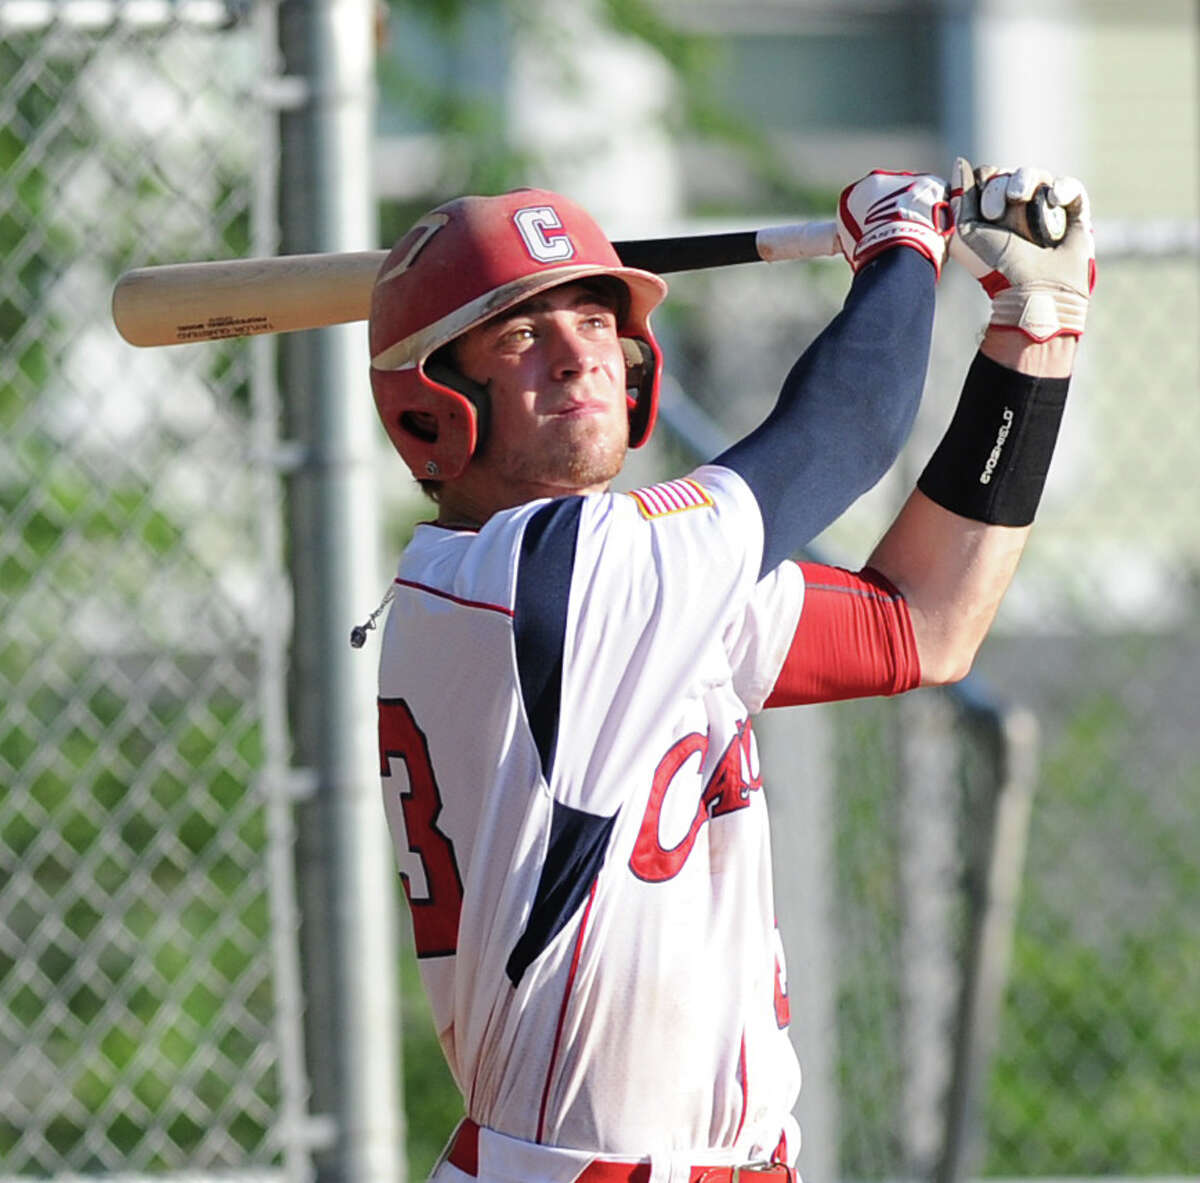 Taylor Olmstead of Greenwich doubles in a run during the bottom of the 4th inning against Westport during Senior Legion baseball game at Havemeyer Field in Greenwich, Friday, July 5, 2013.